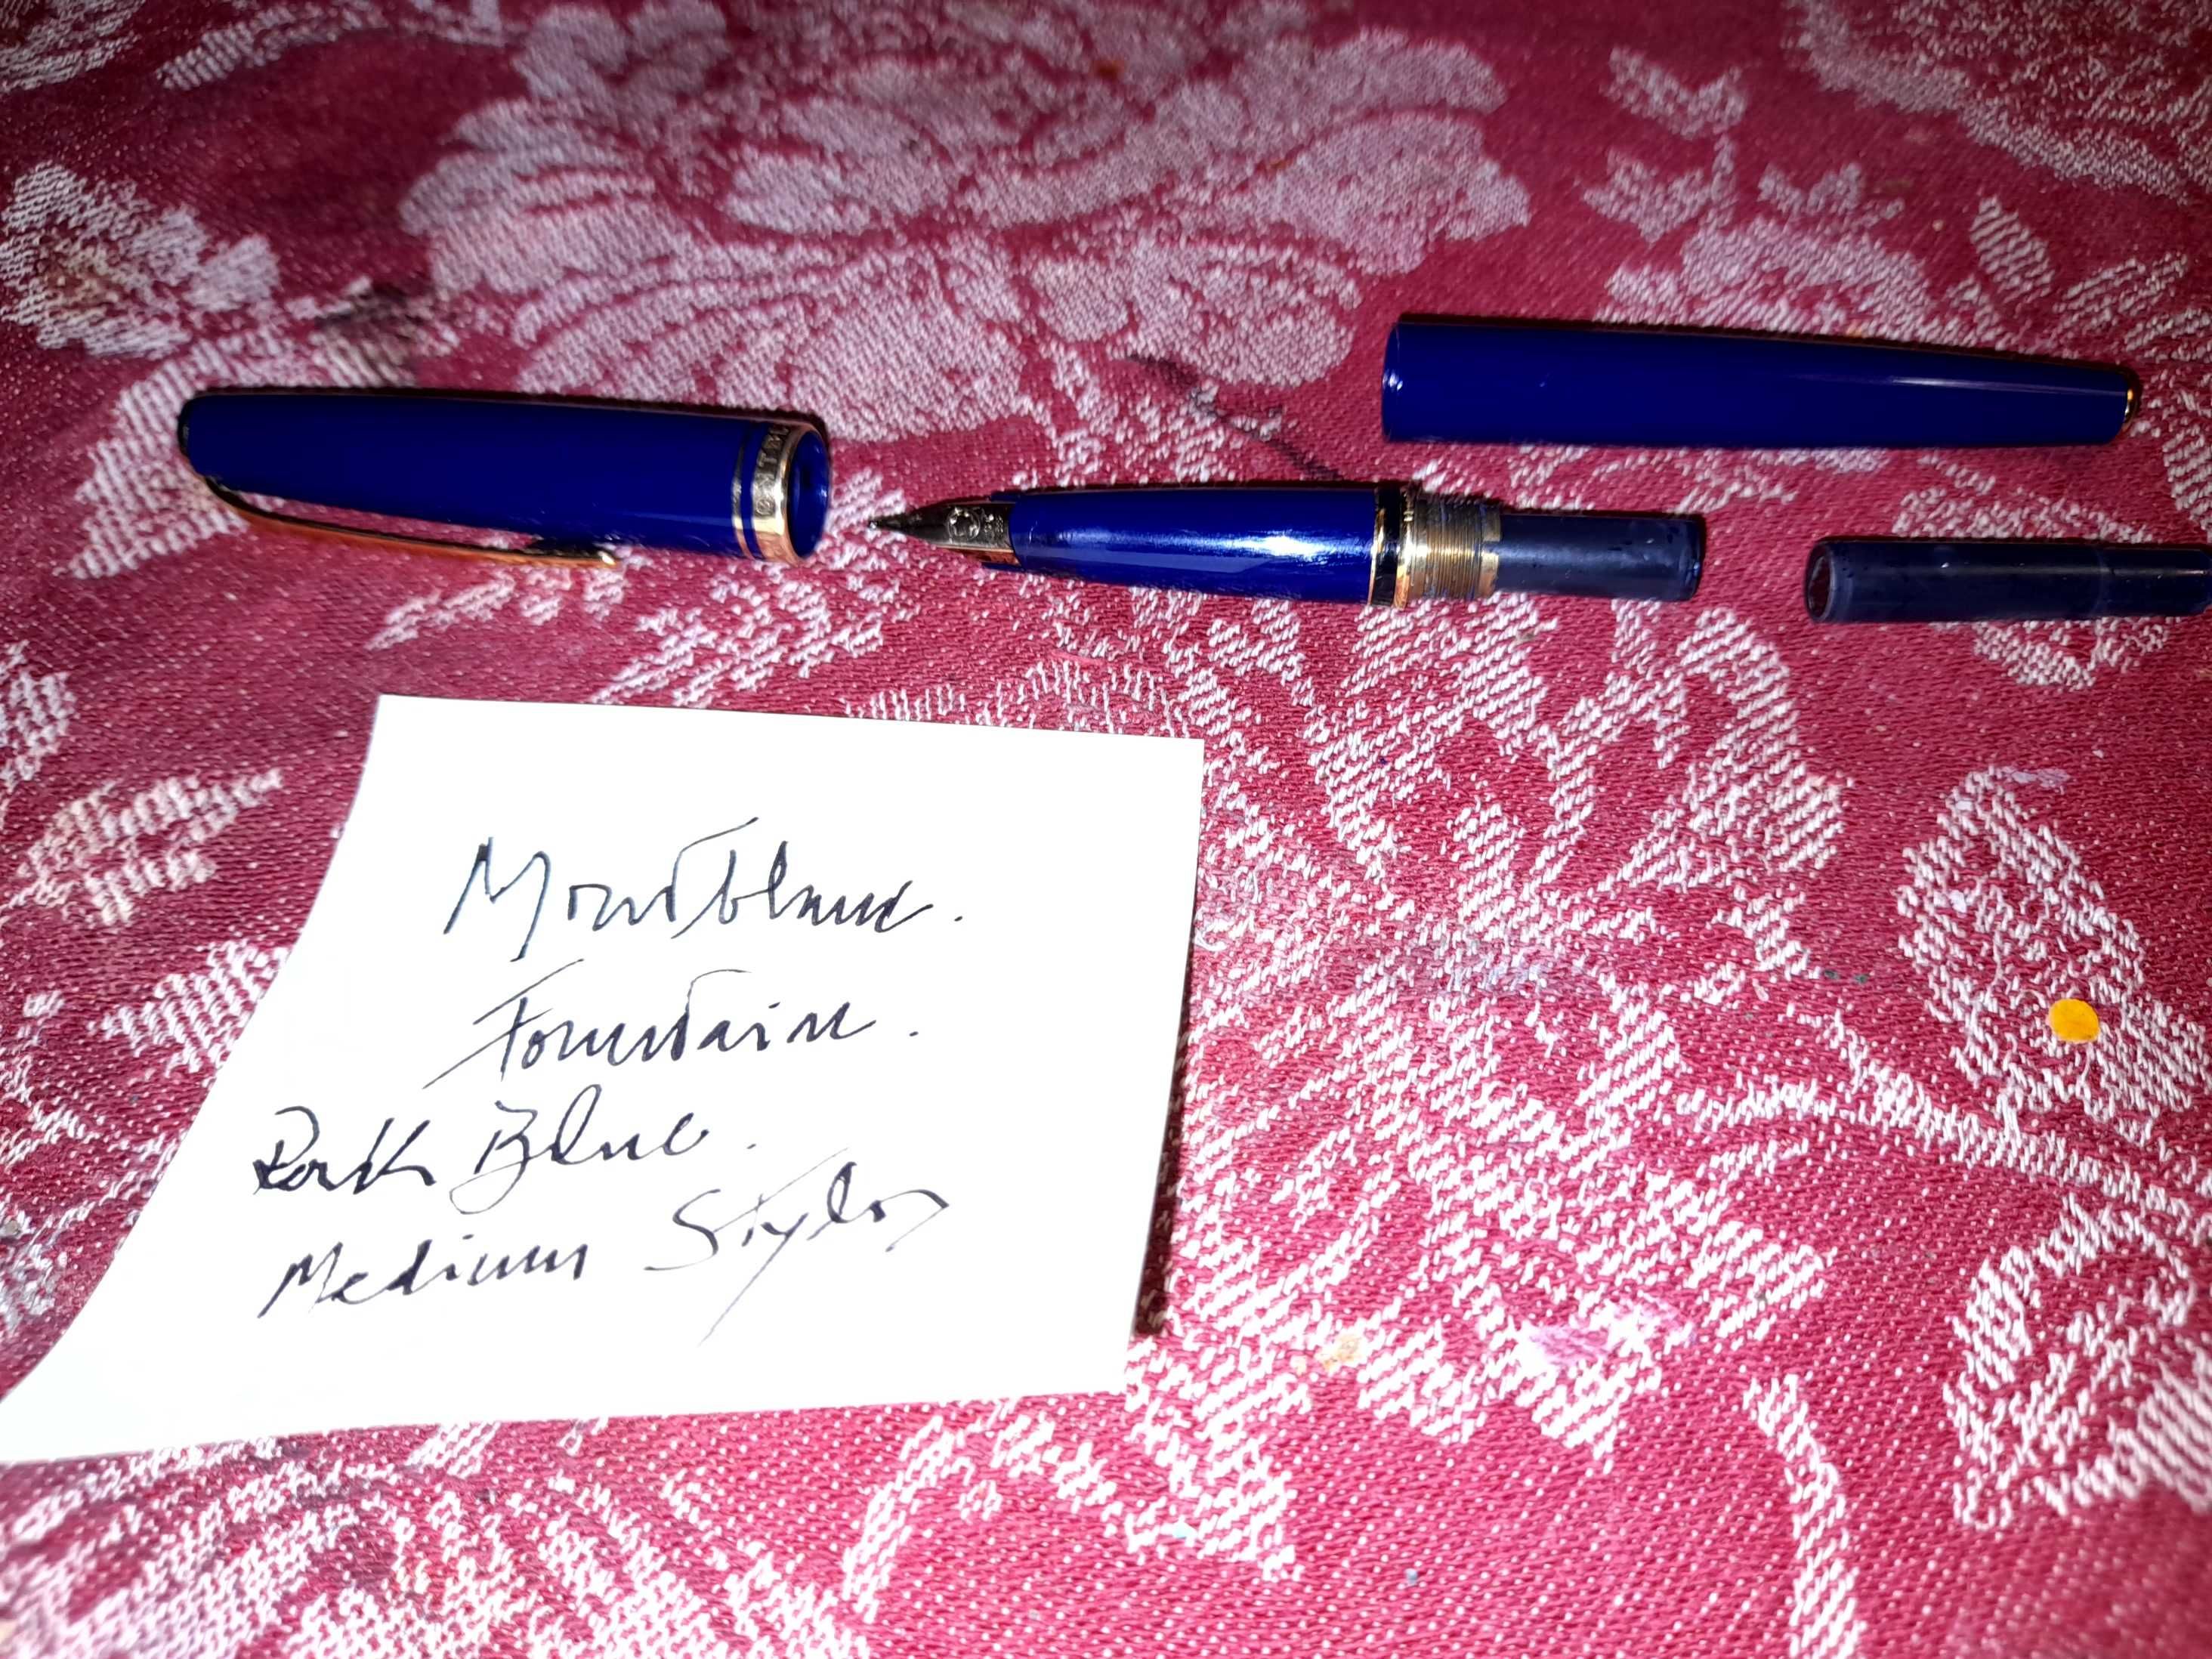 Montblanc Fontain Dark Blue Lacque de Chine, Gold Stylos- LINDISSIMA